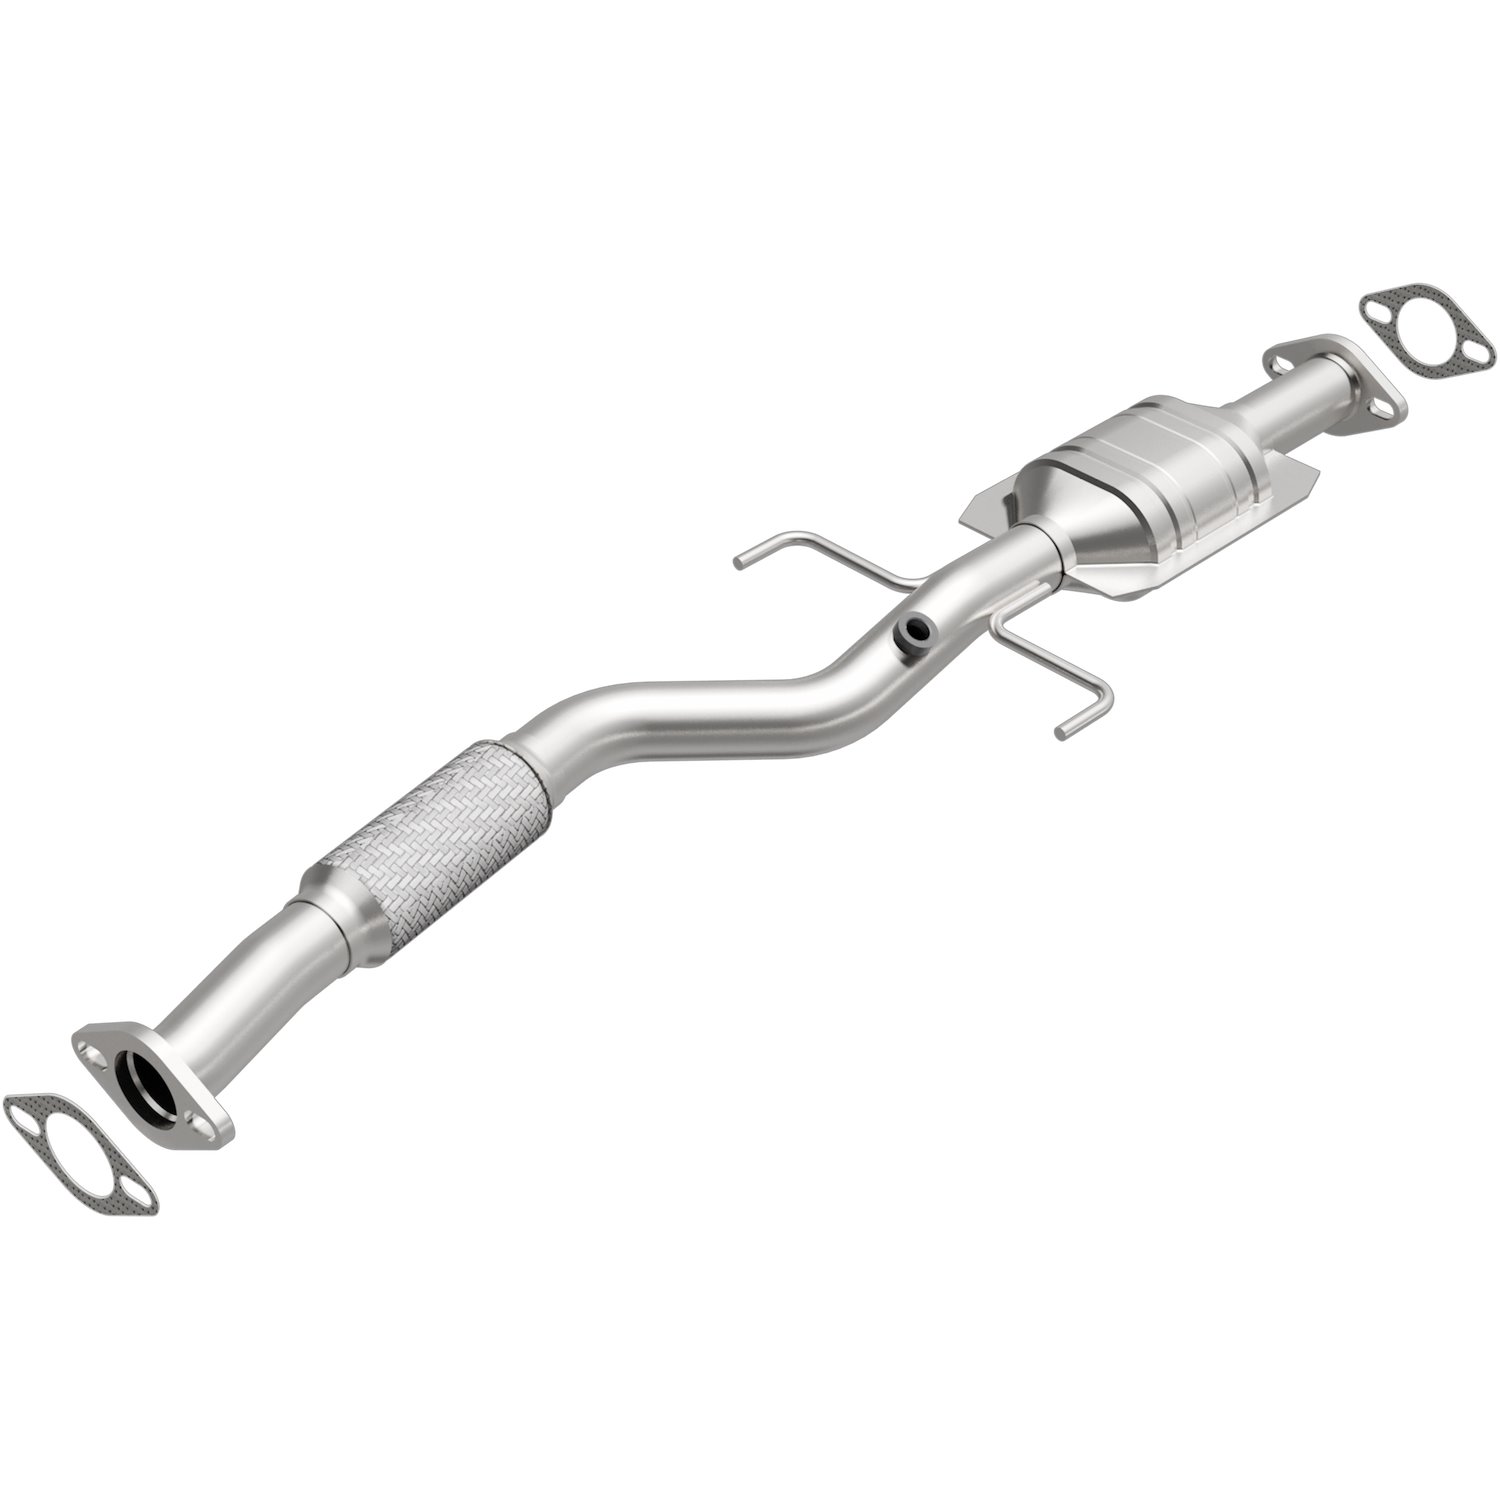 OEM Grade Federal / EPA Compliant Direct-Fit Catalytic Converter 49458